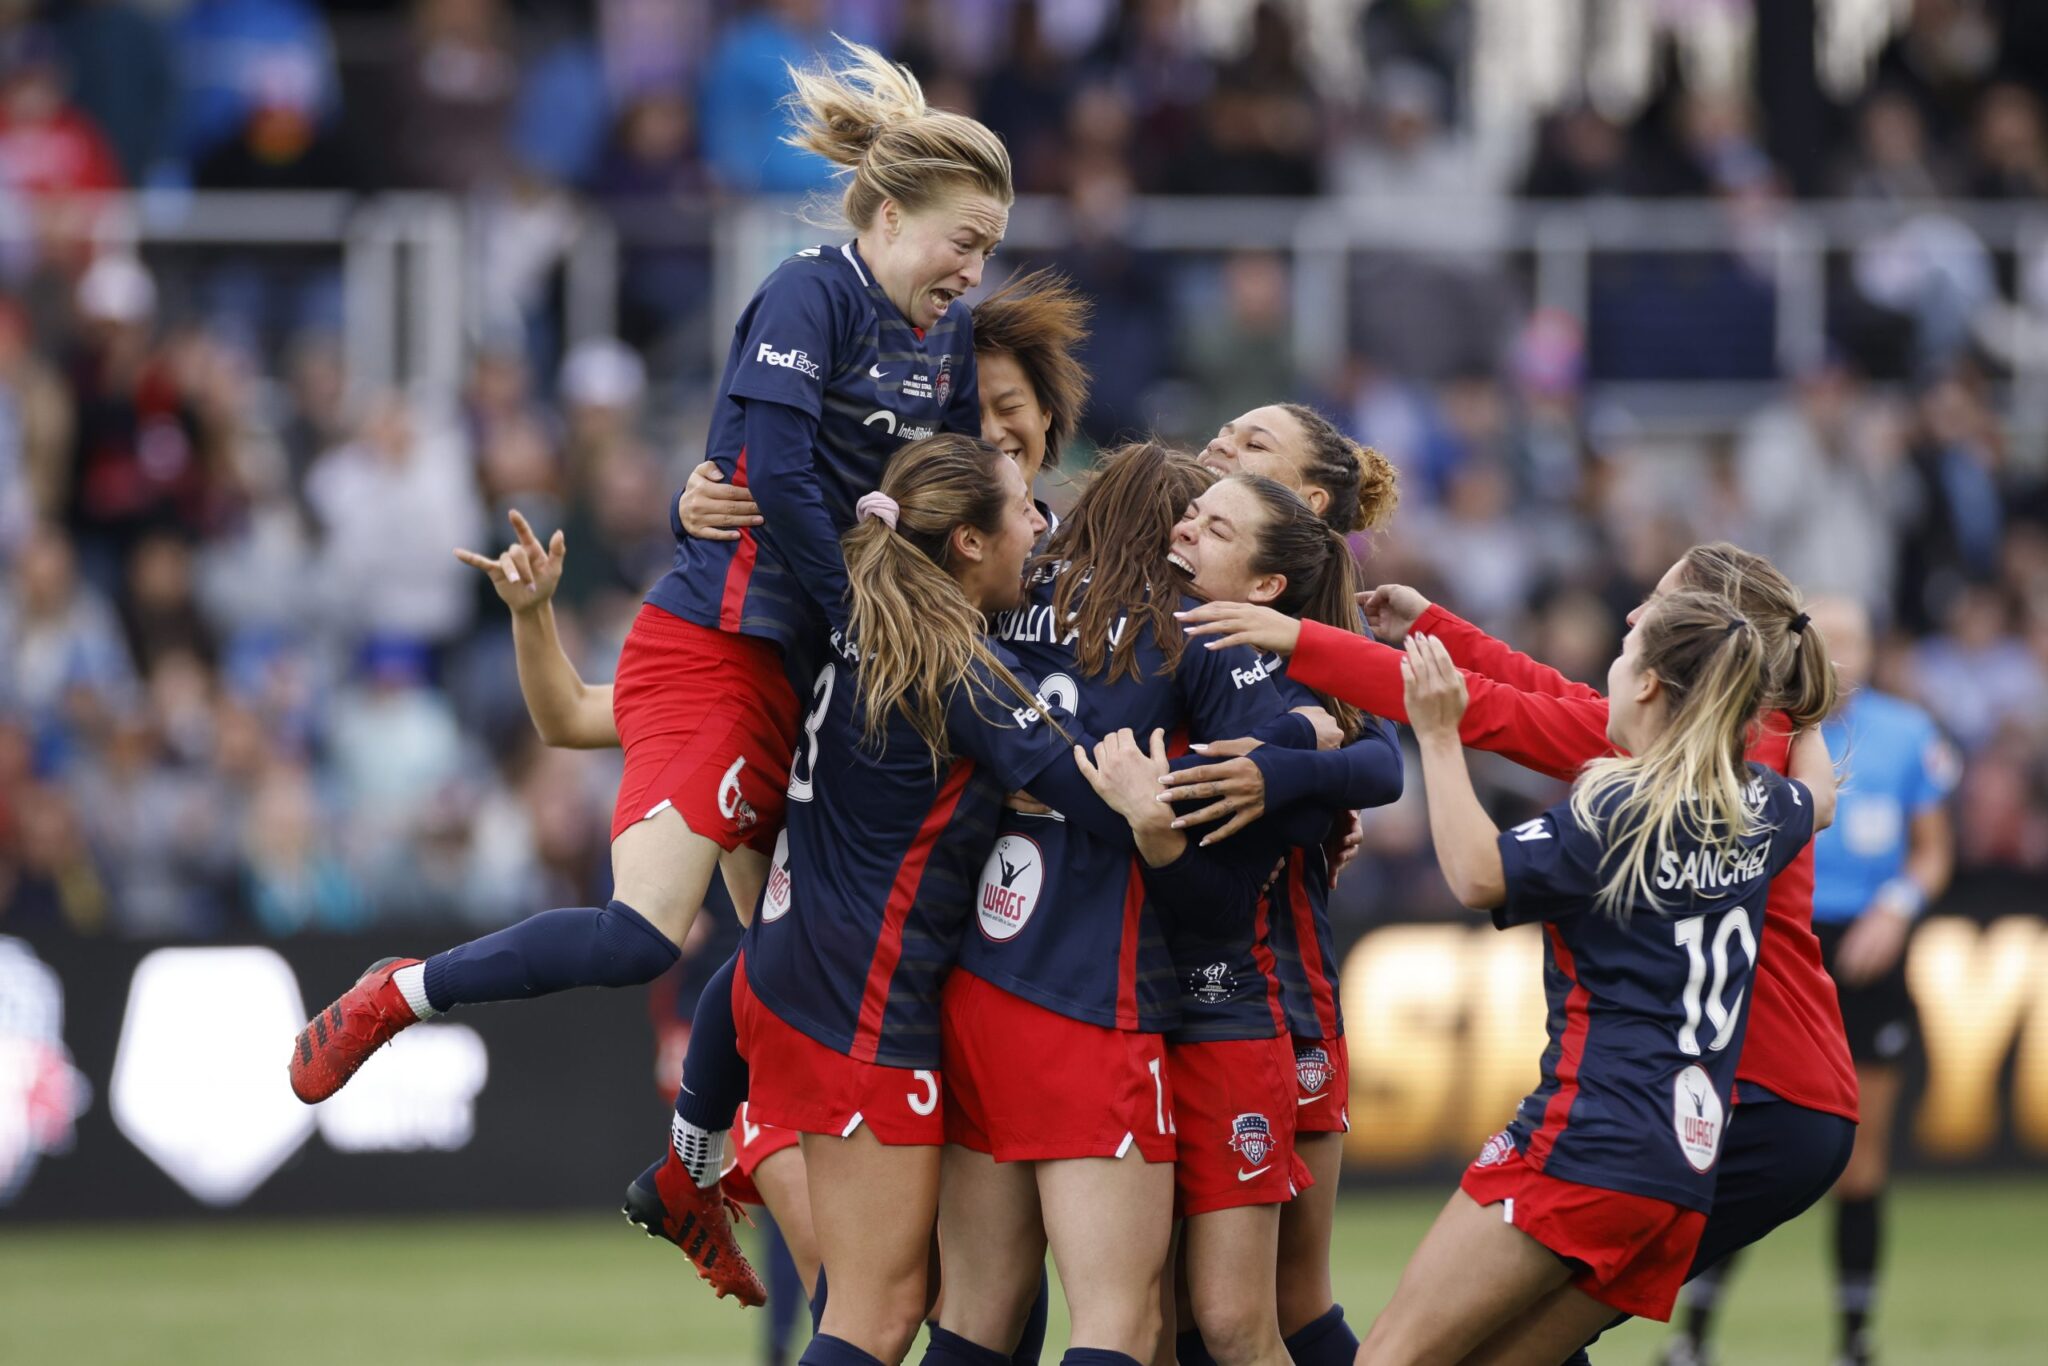 Spirit Secures First NWSL Title with 2-1 Win over Chicago Featured Image